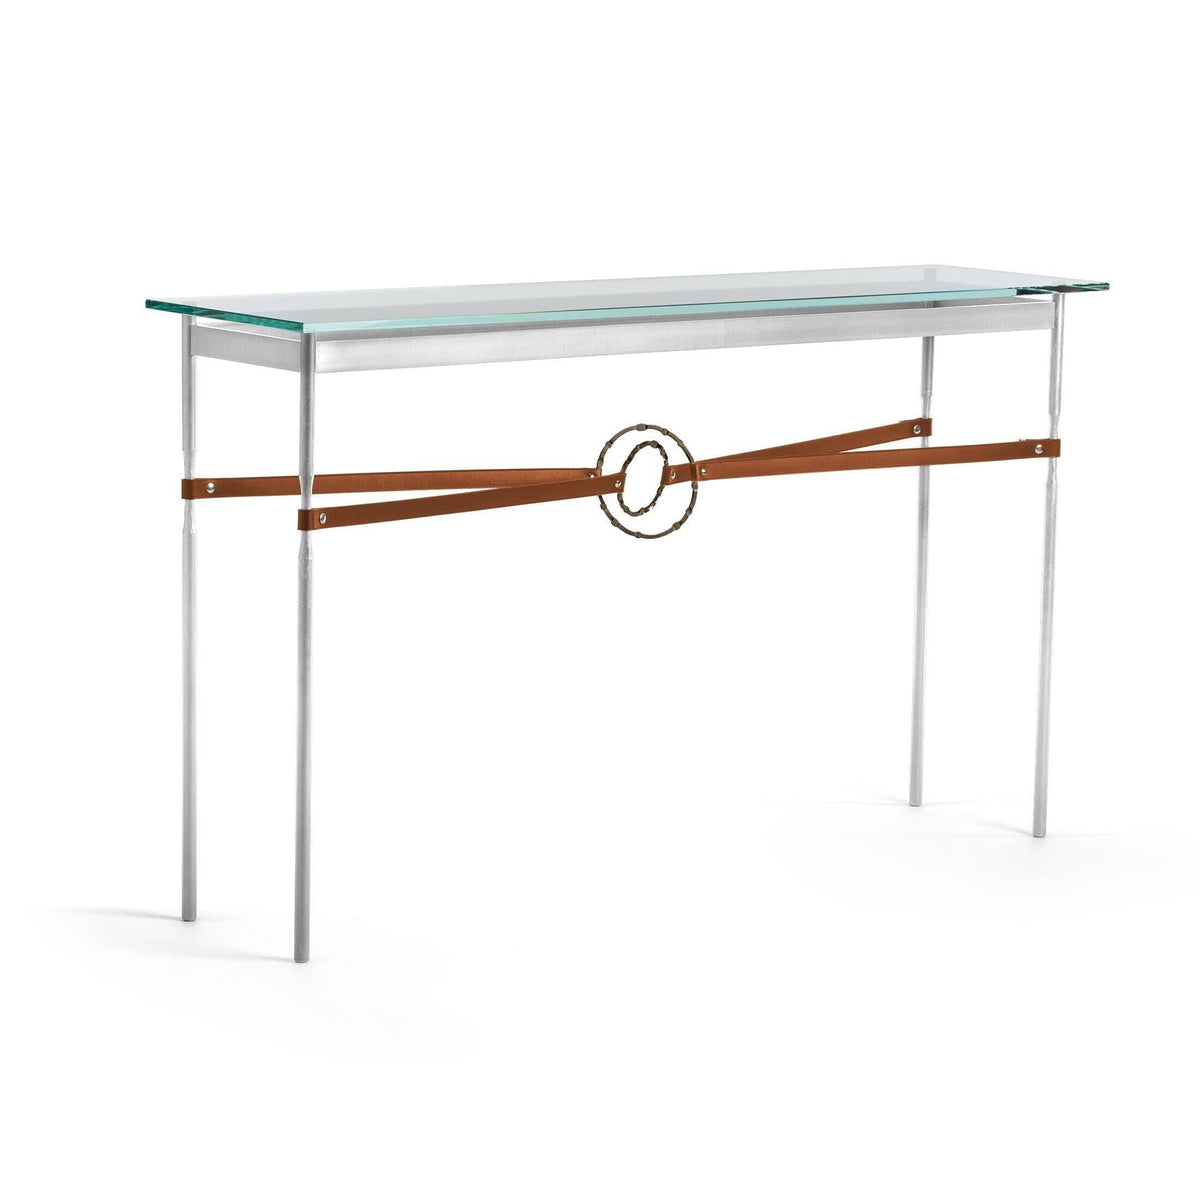 Hubbardton Forge - Equus Chestnut Leather Console Table - 750118-85-05-LC-VA0714 | Montreal Lighting & Hardware